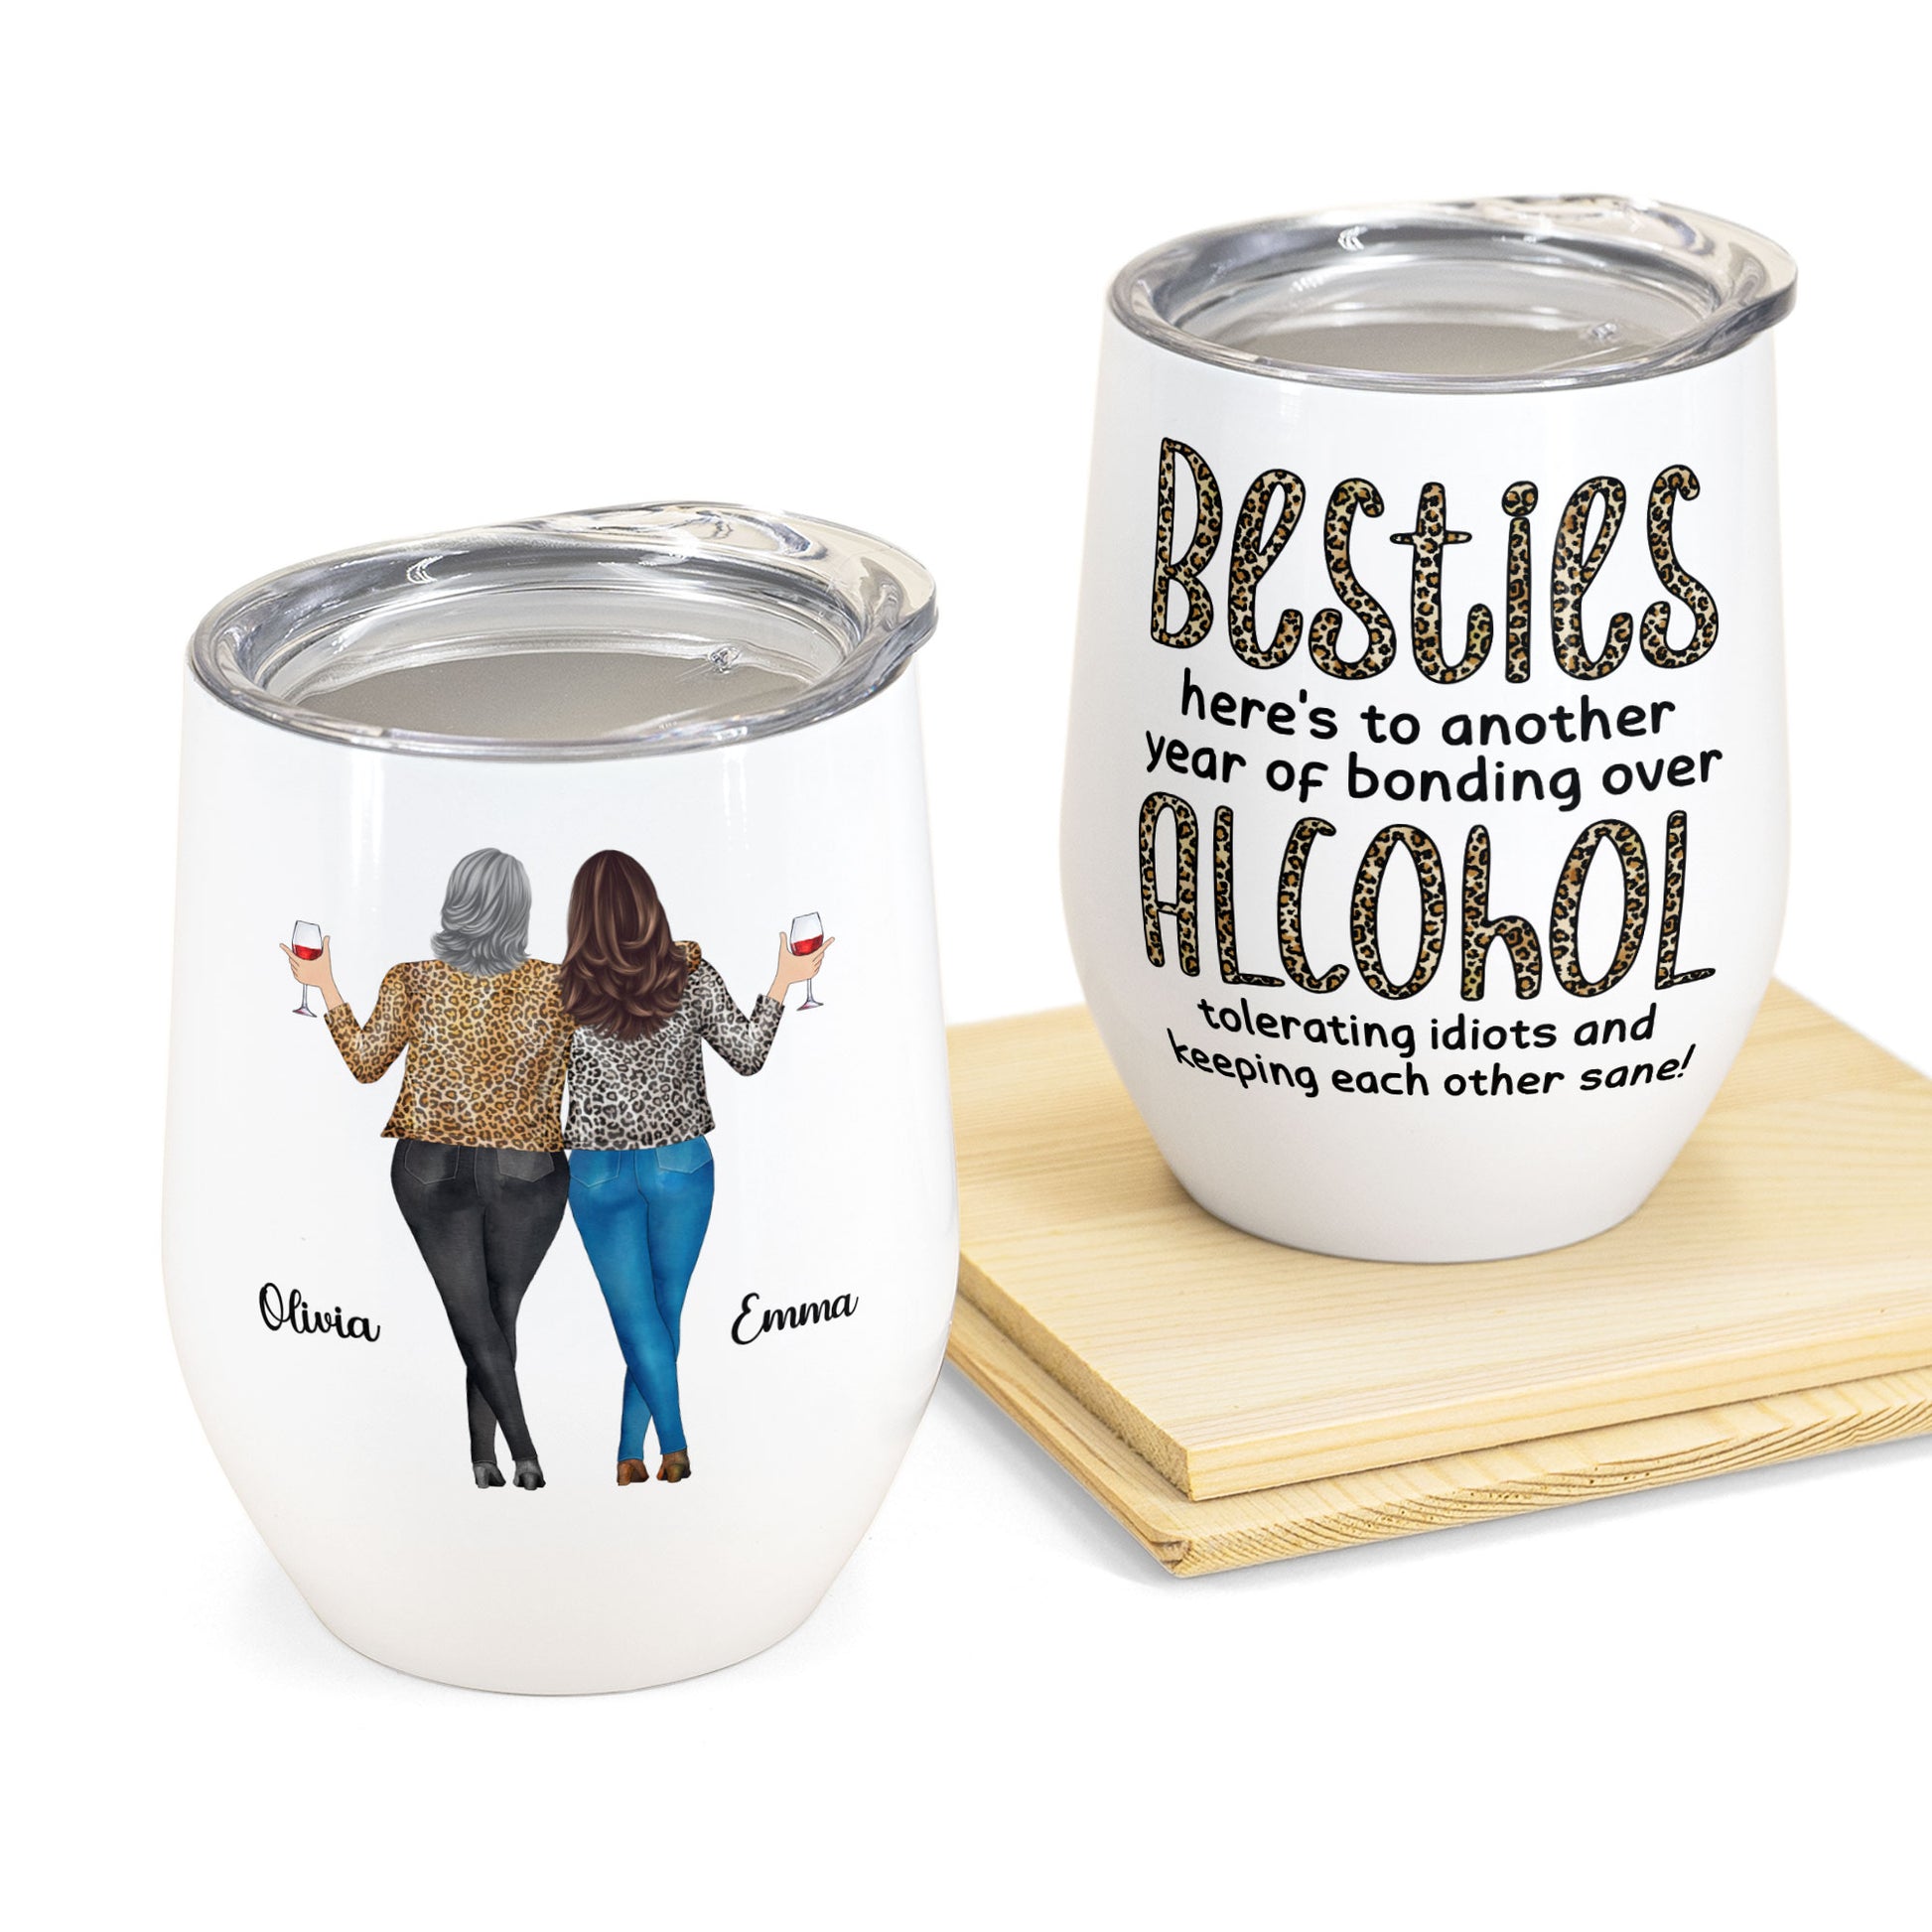 Liquid Therapy Wine Tumbler, Gift for Her, Gift Ideas for Best Friend -  Sugar Crush Co.